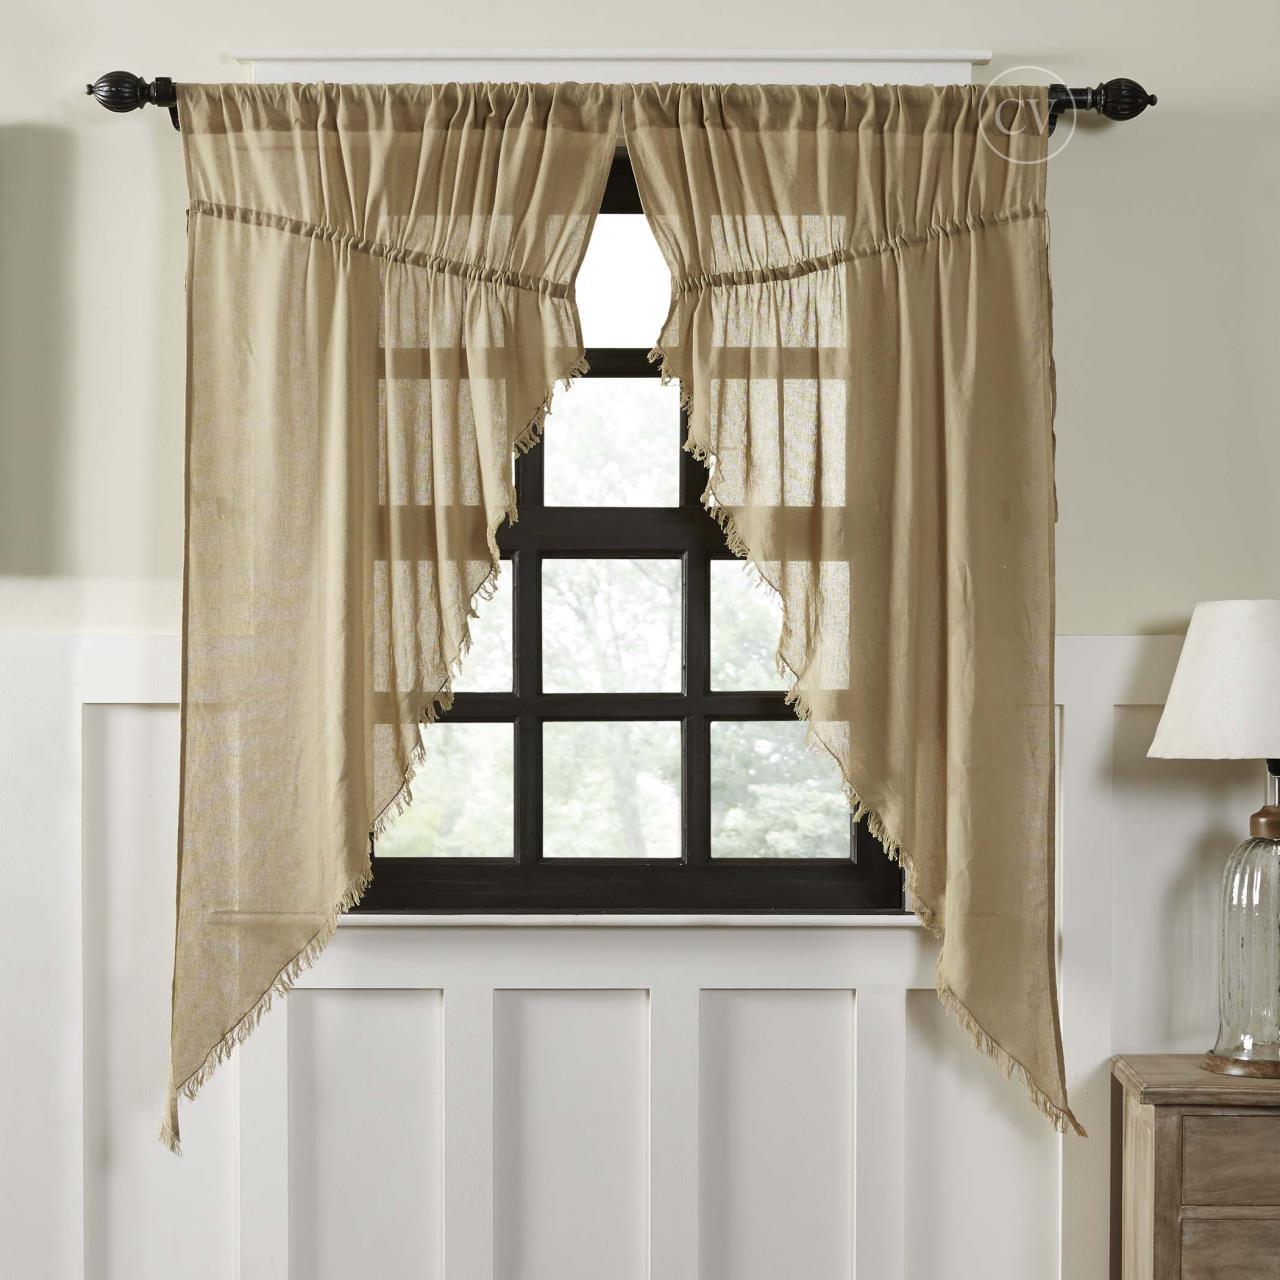 Primitive Curtains for Warm and Friendly Effects in the Home Interior